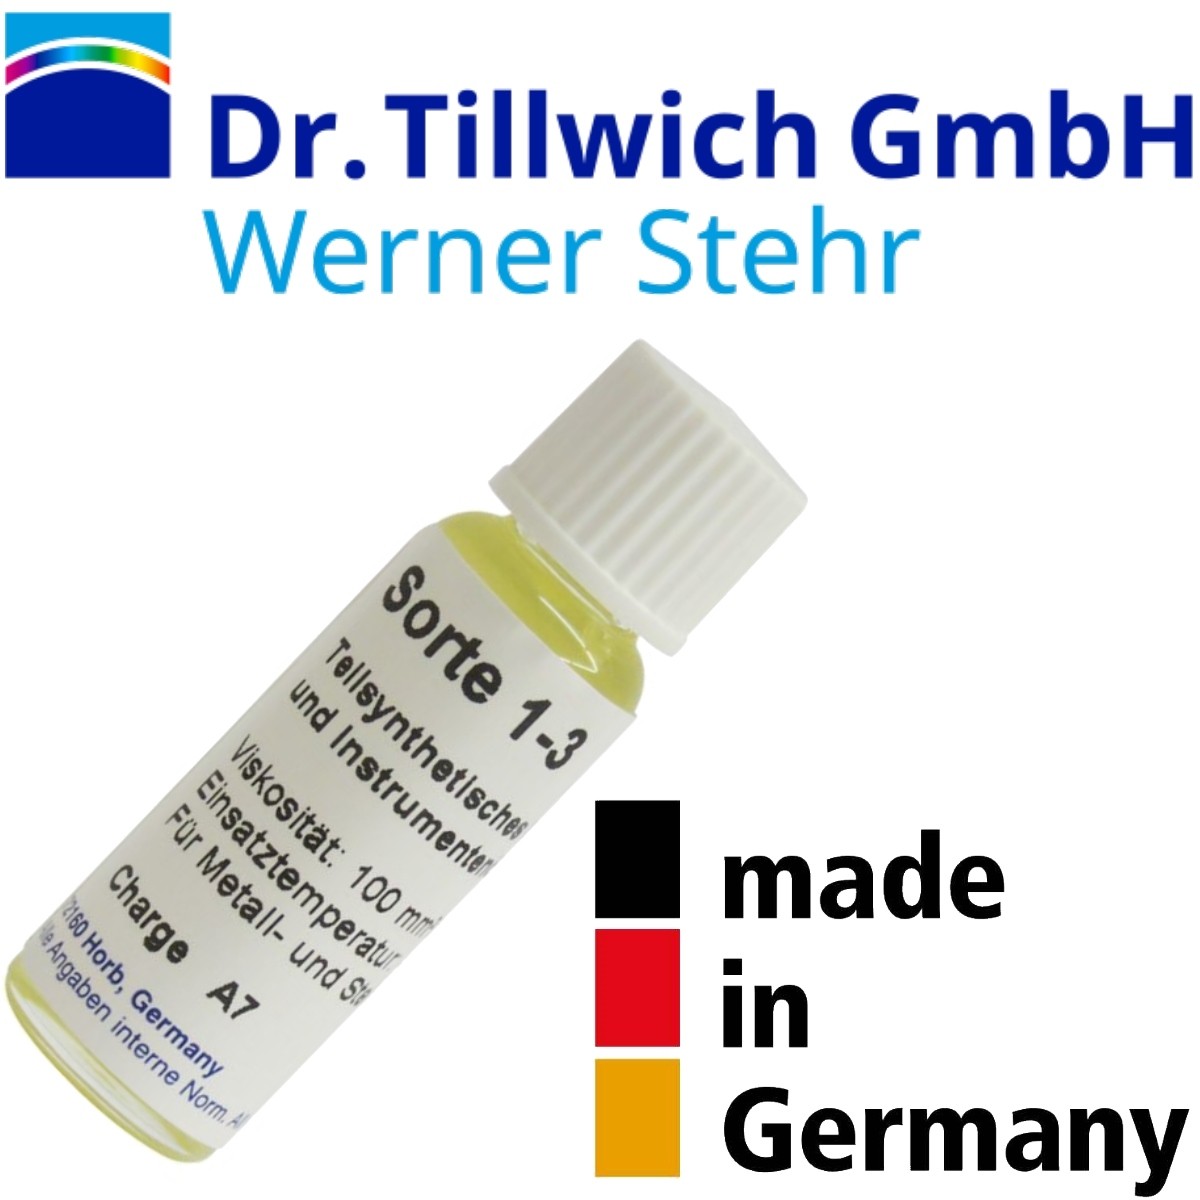 Dr. Tillwich ntha partially synthetic watch oil 1-3 for